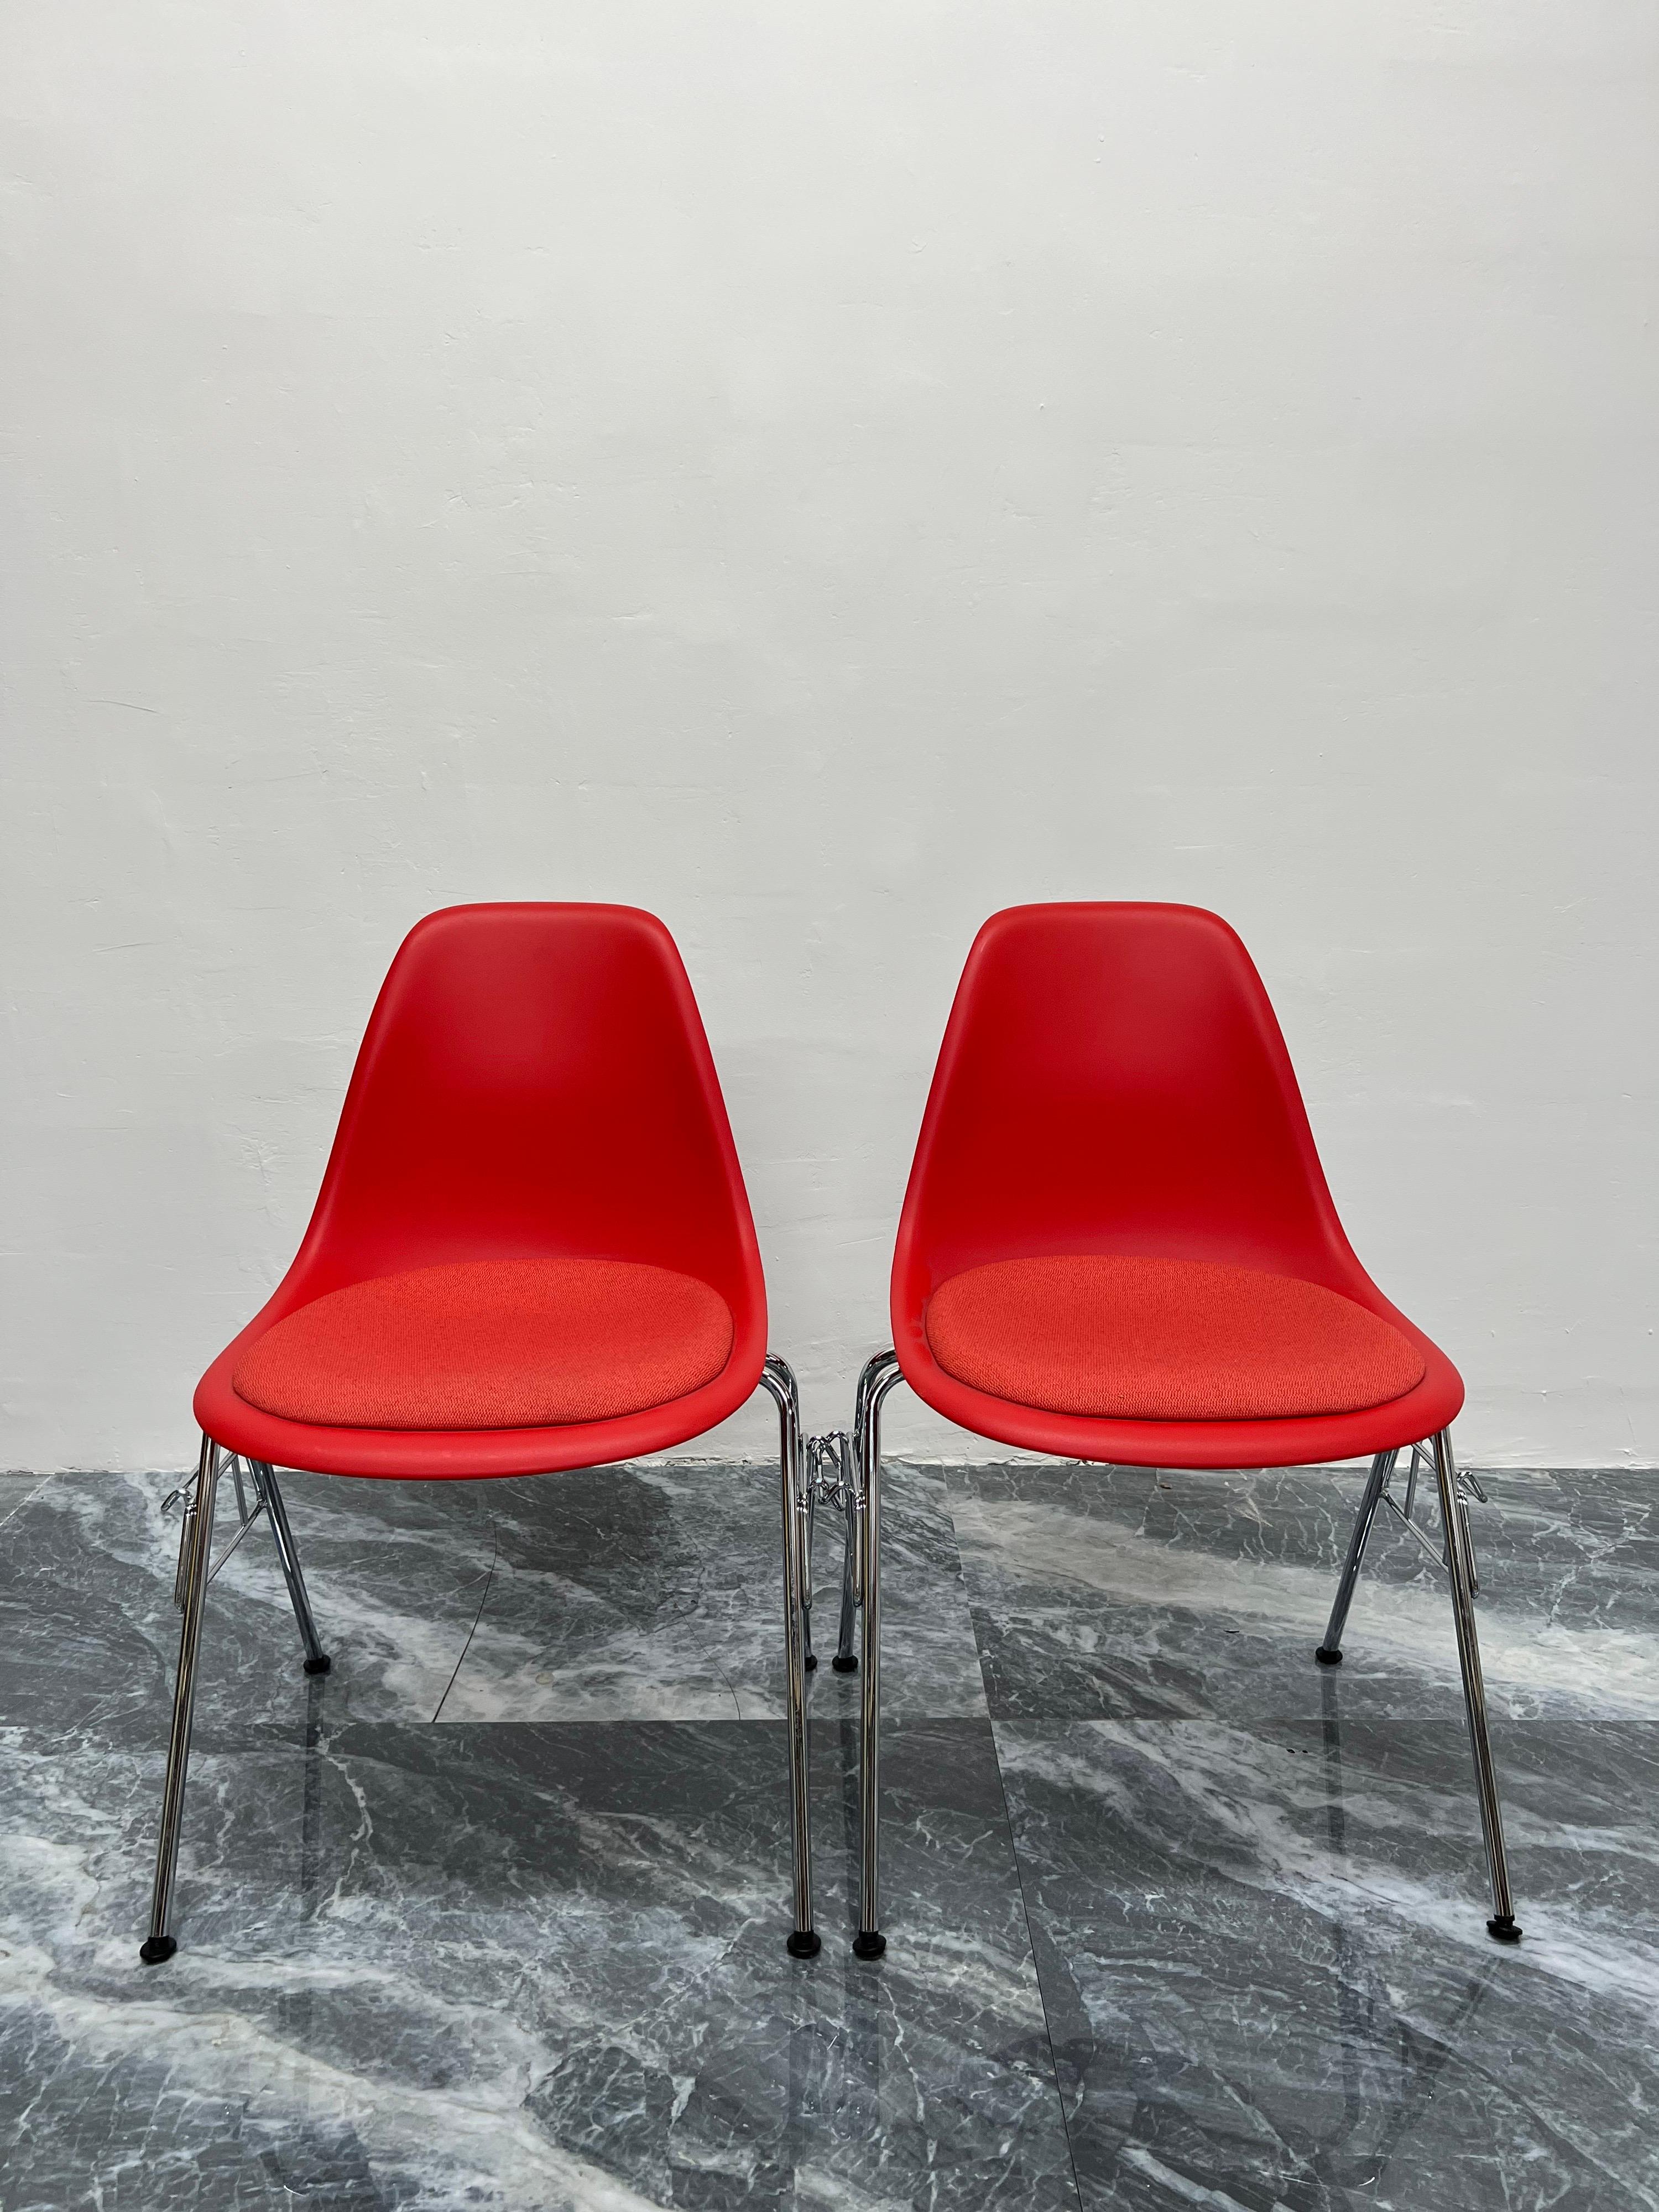 Stackable and interlocking molded eco friendly plastic shell side chairs with upholstered seats and chromed steel legs by Charles and Ray Eames for Herman Miller.